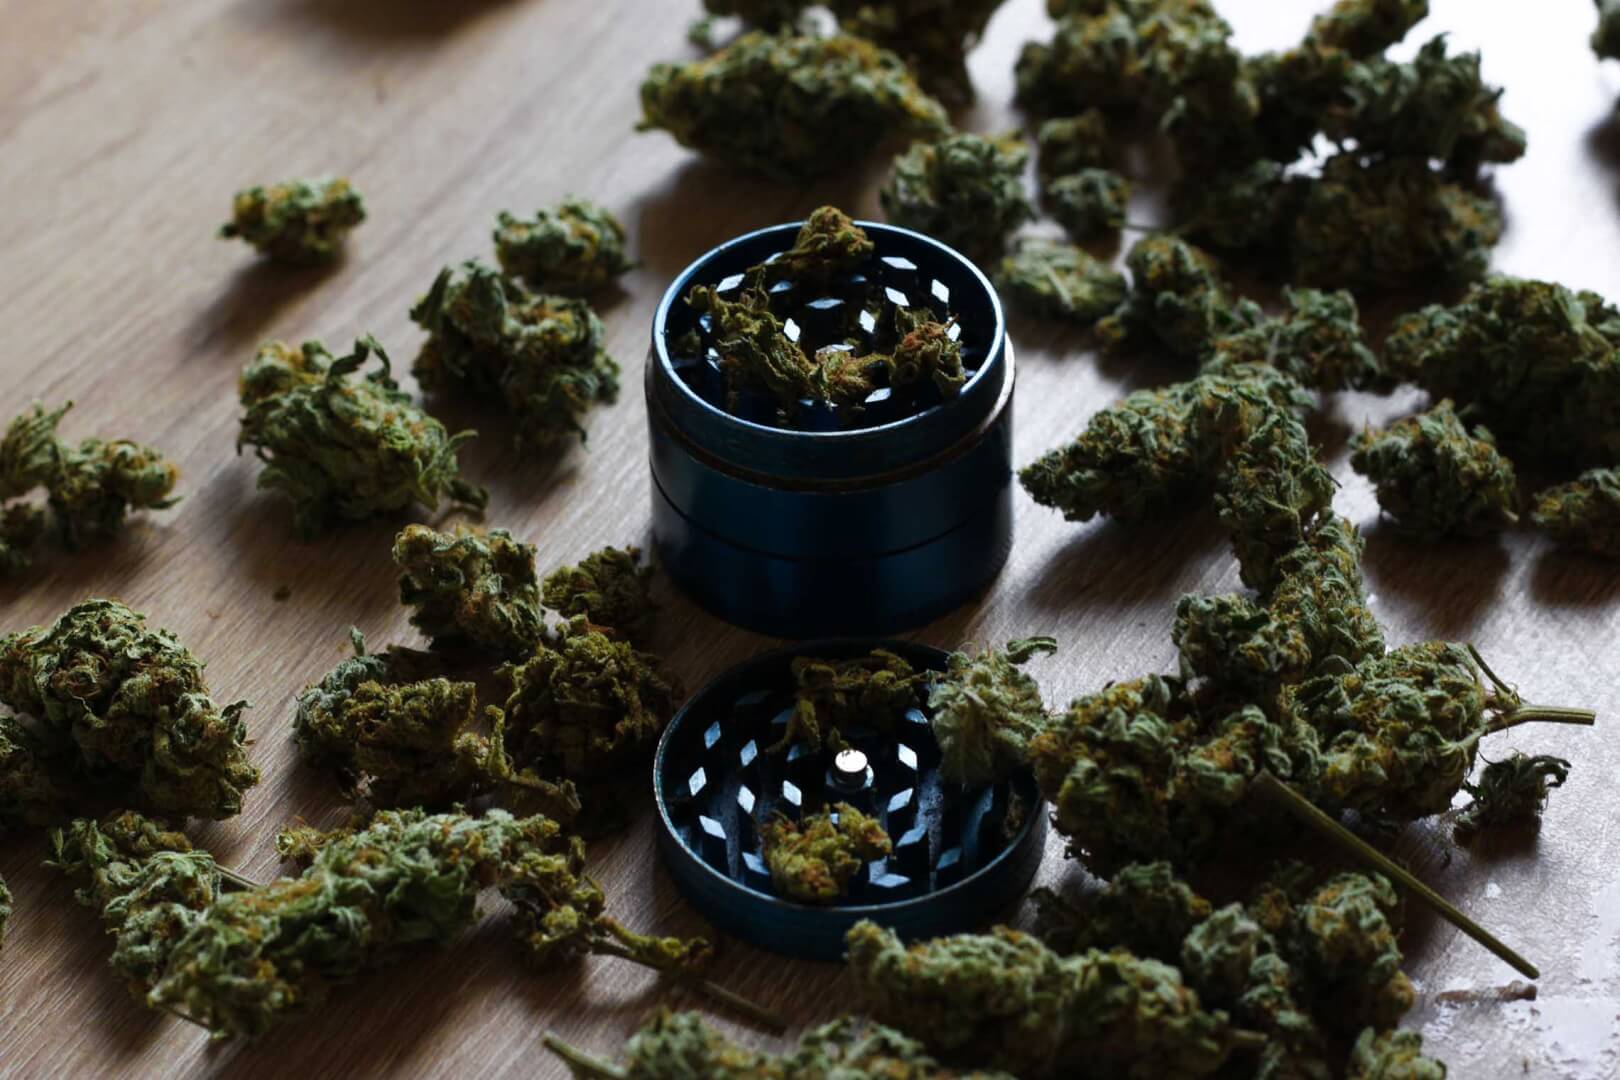  Right Grinder for Your Cannabis